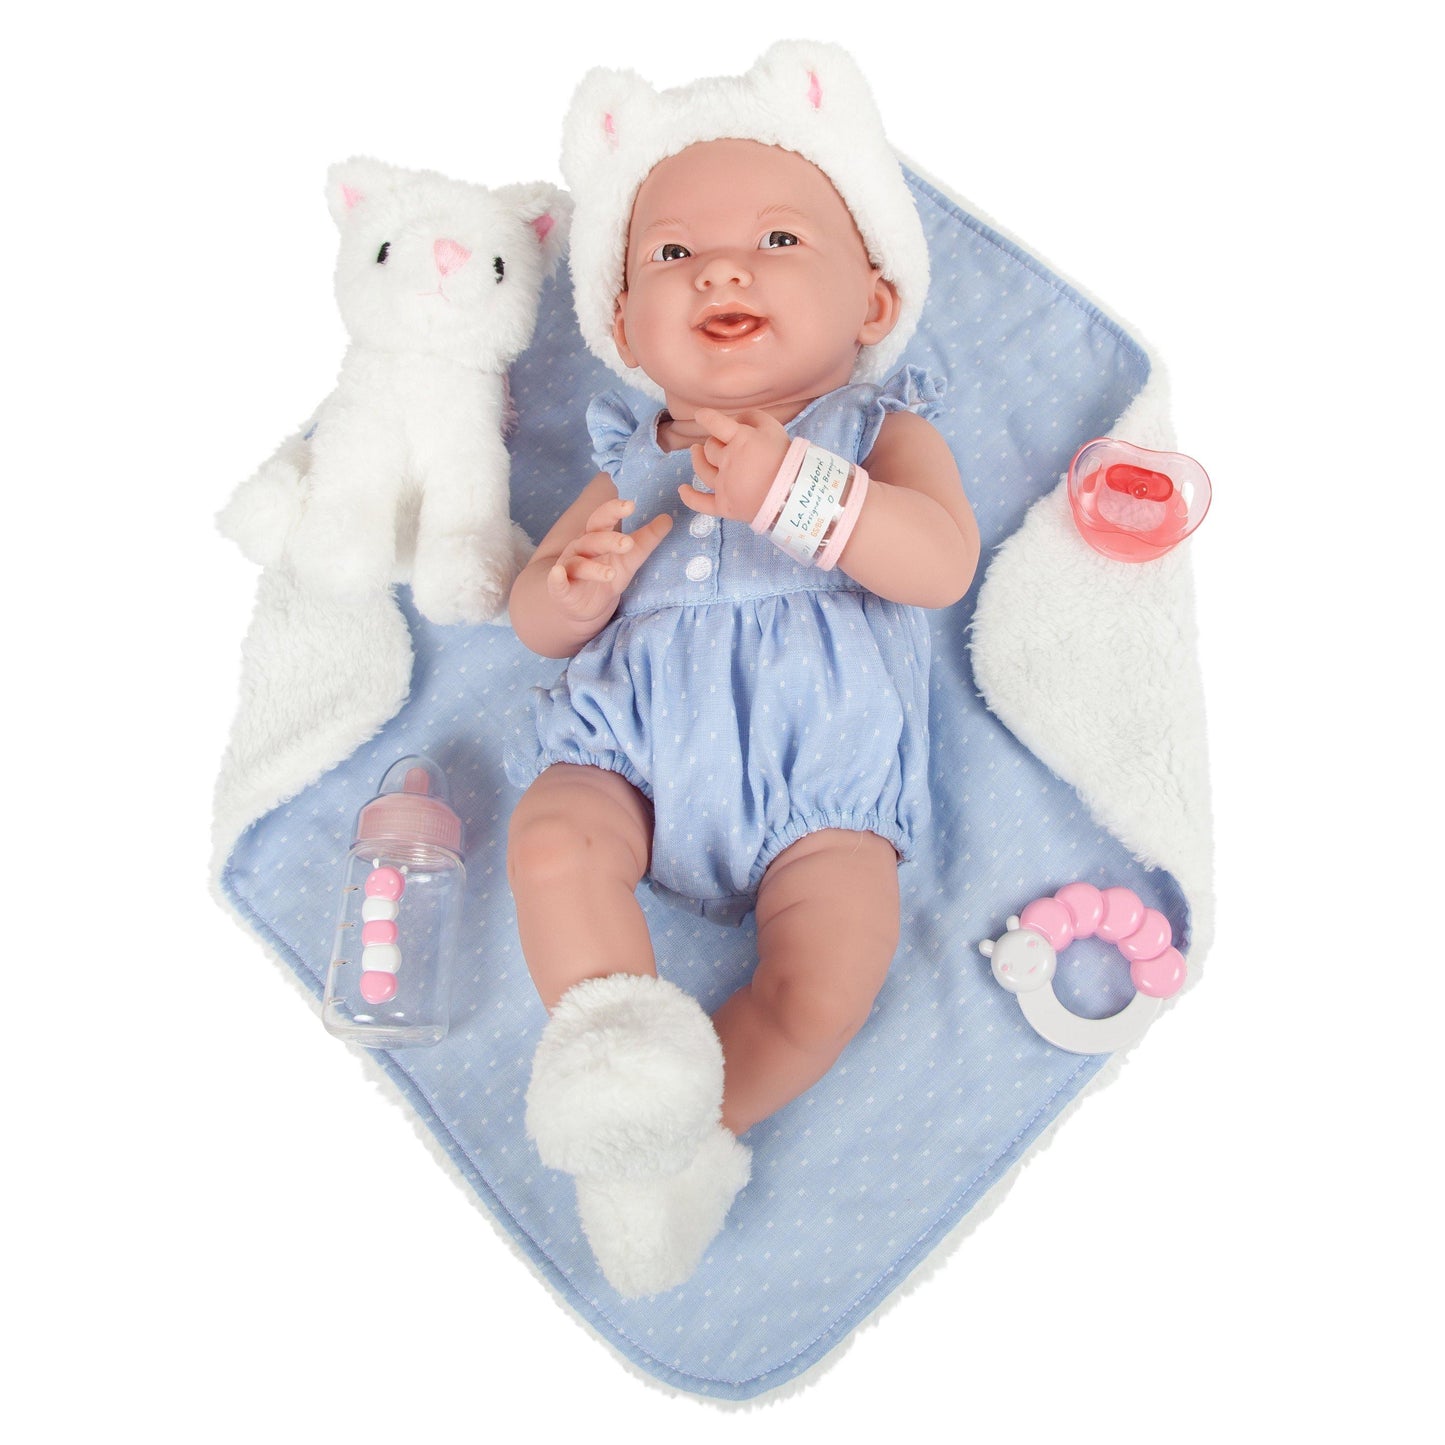 JC Toys, La Newborn All-Vinyl Real Girl 15" Baby Doll-Blue Outfit & Accessories - JC Toys Group Inc.